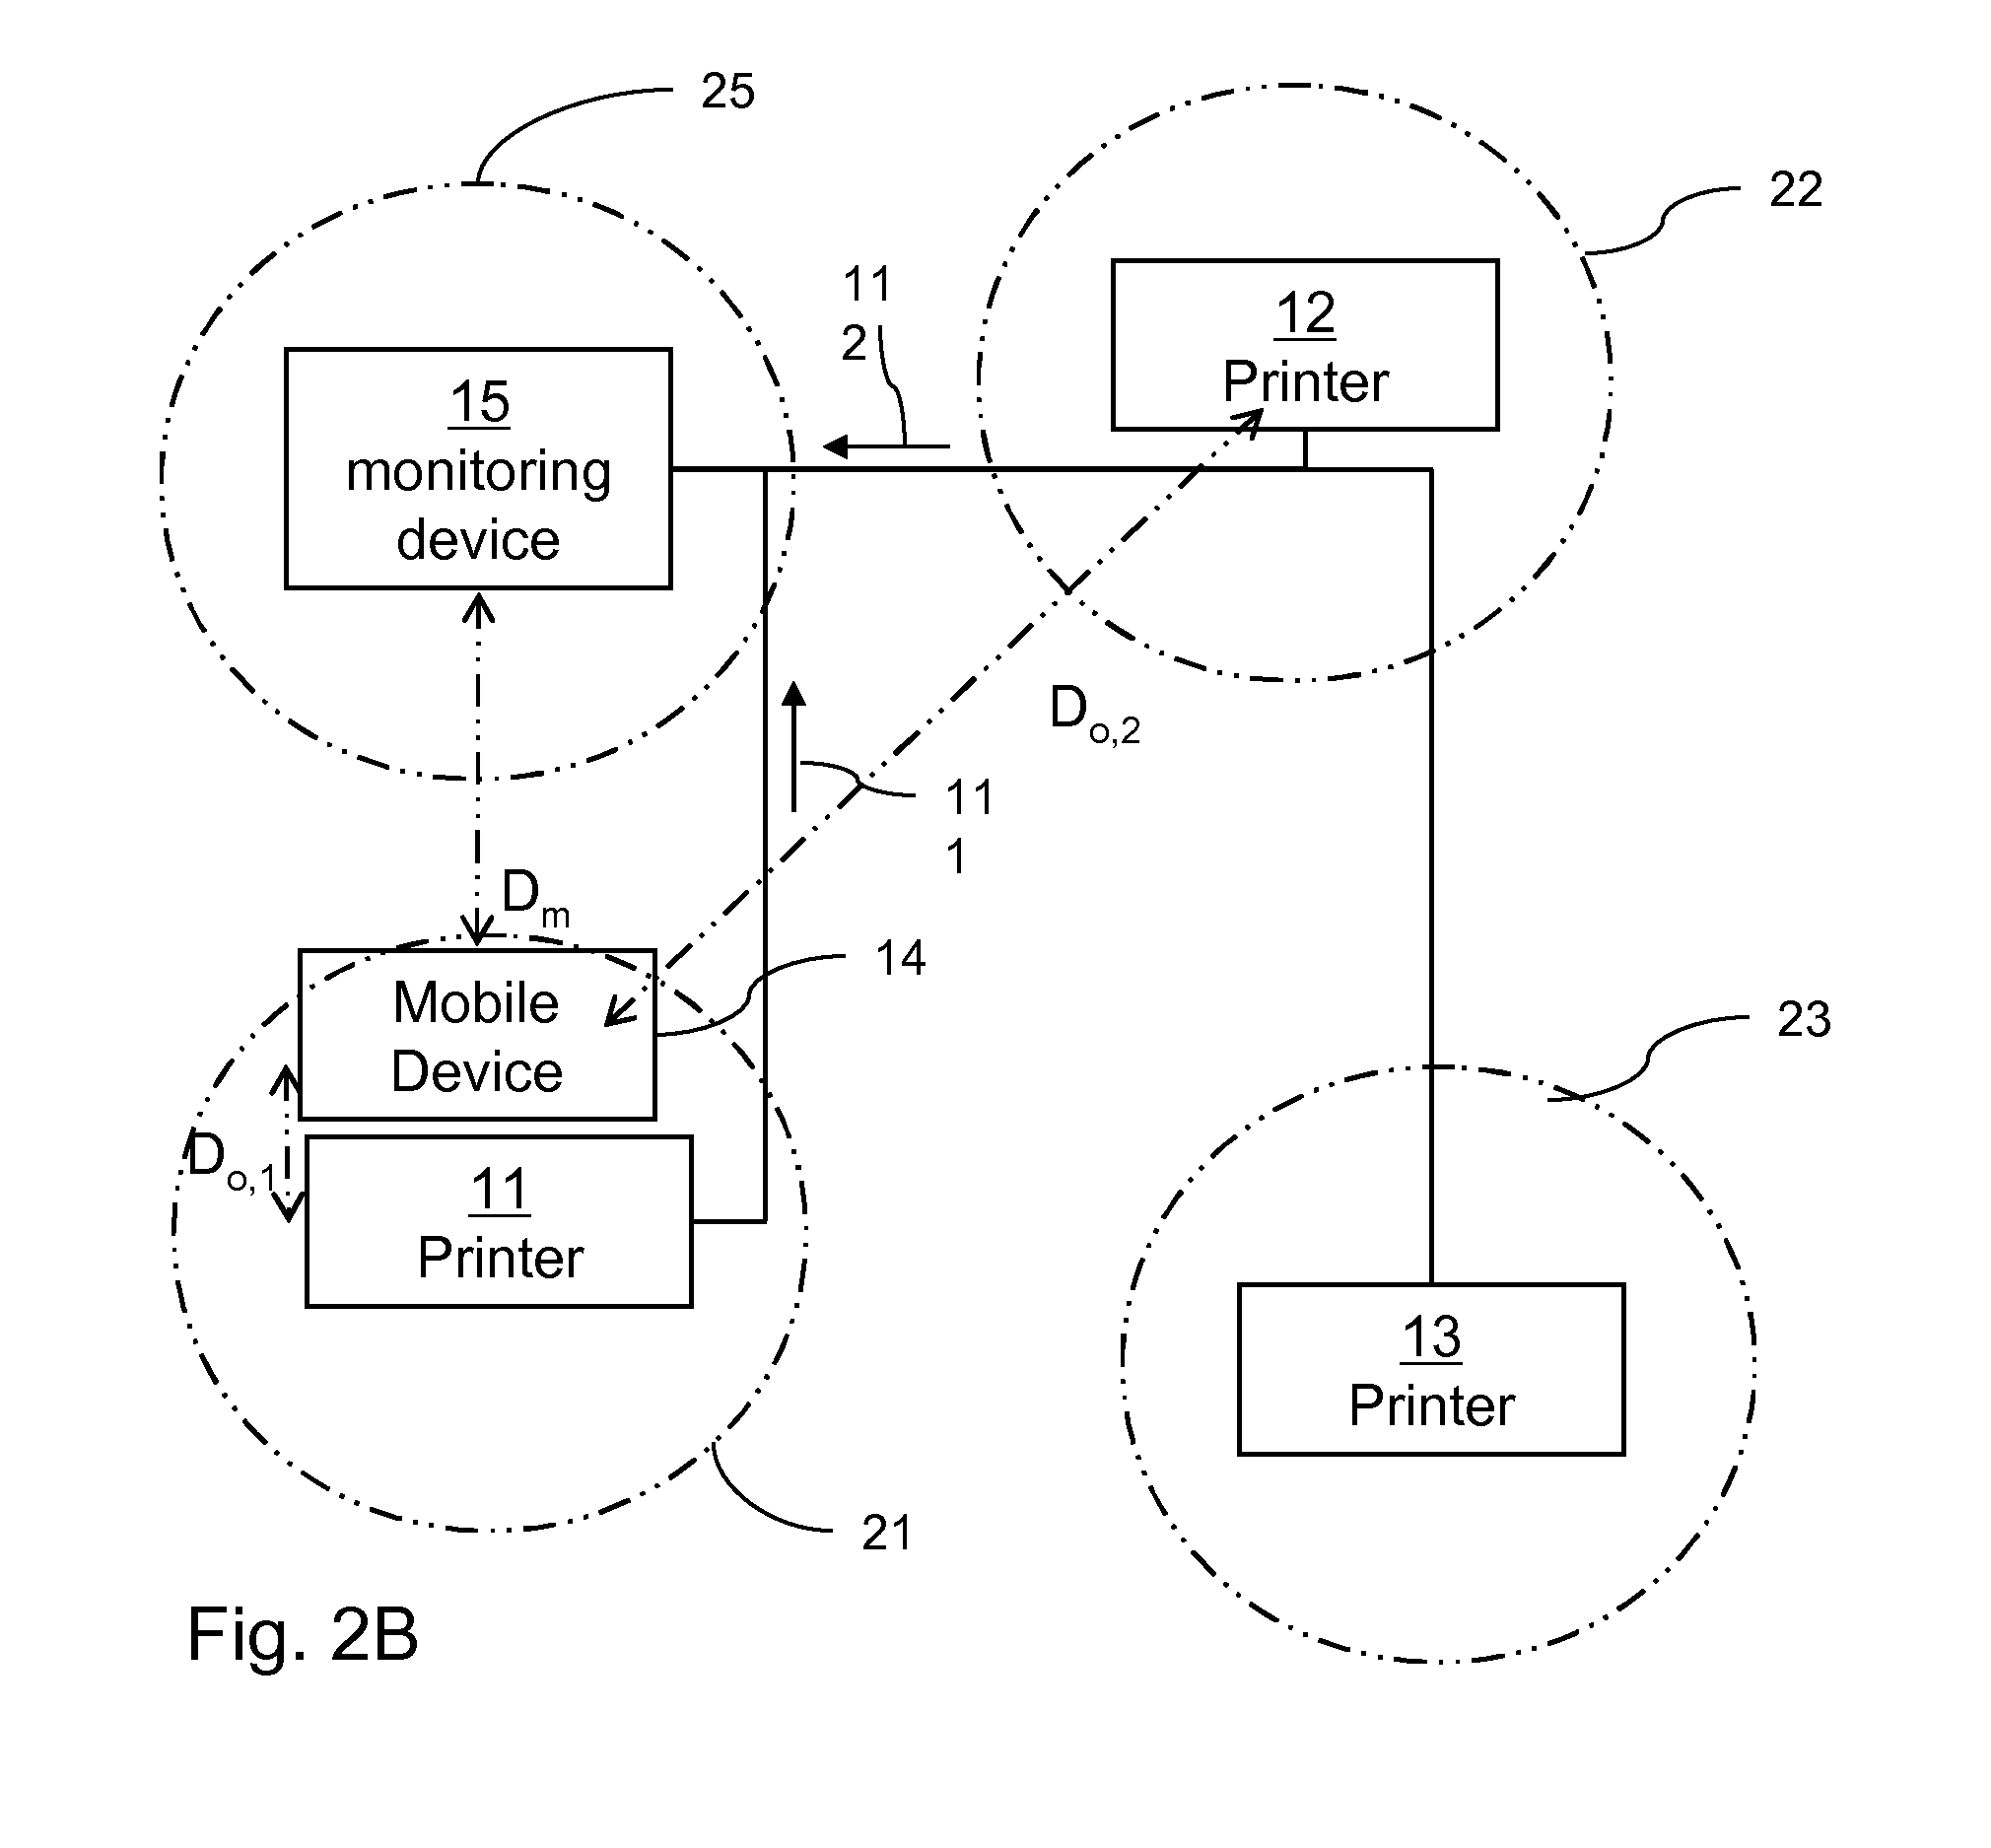 Method for managing a plurality of image processing devices